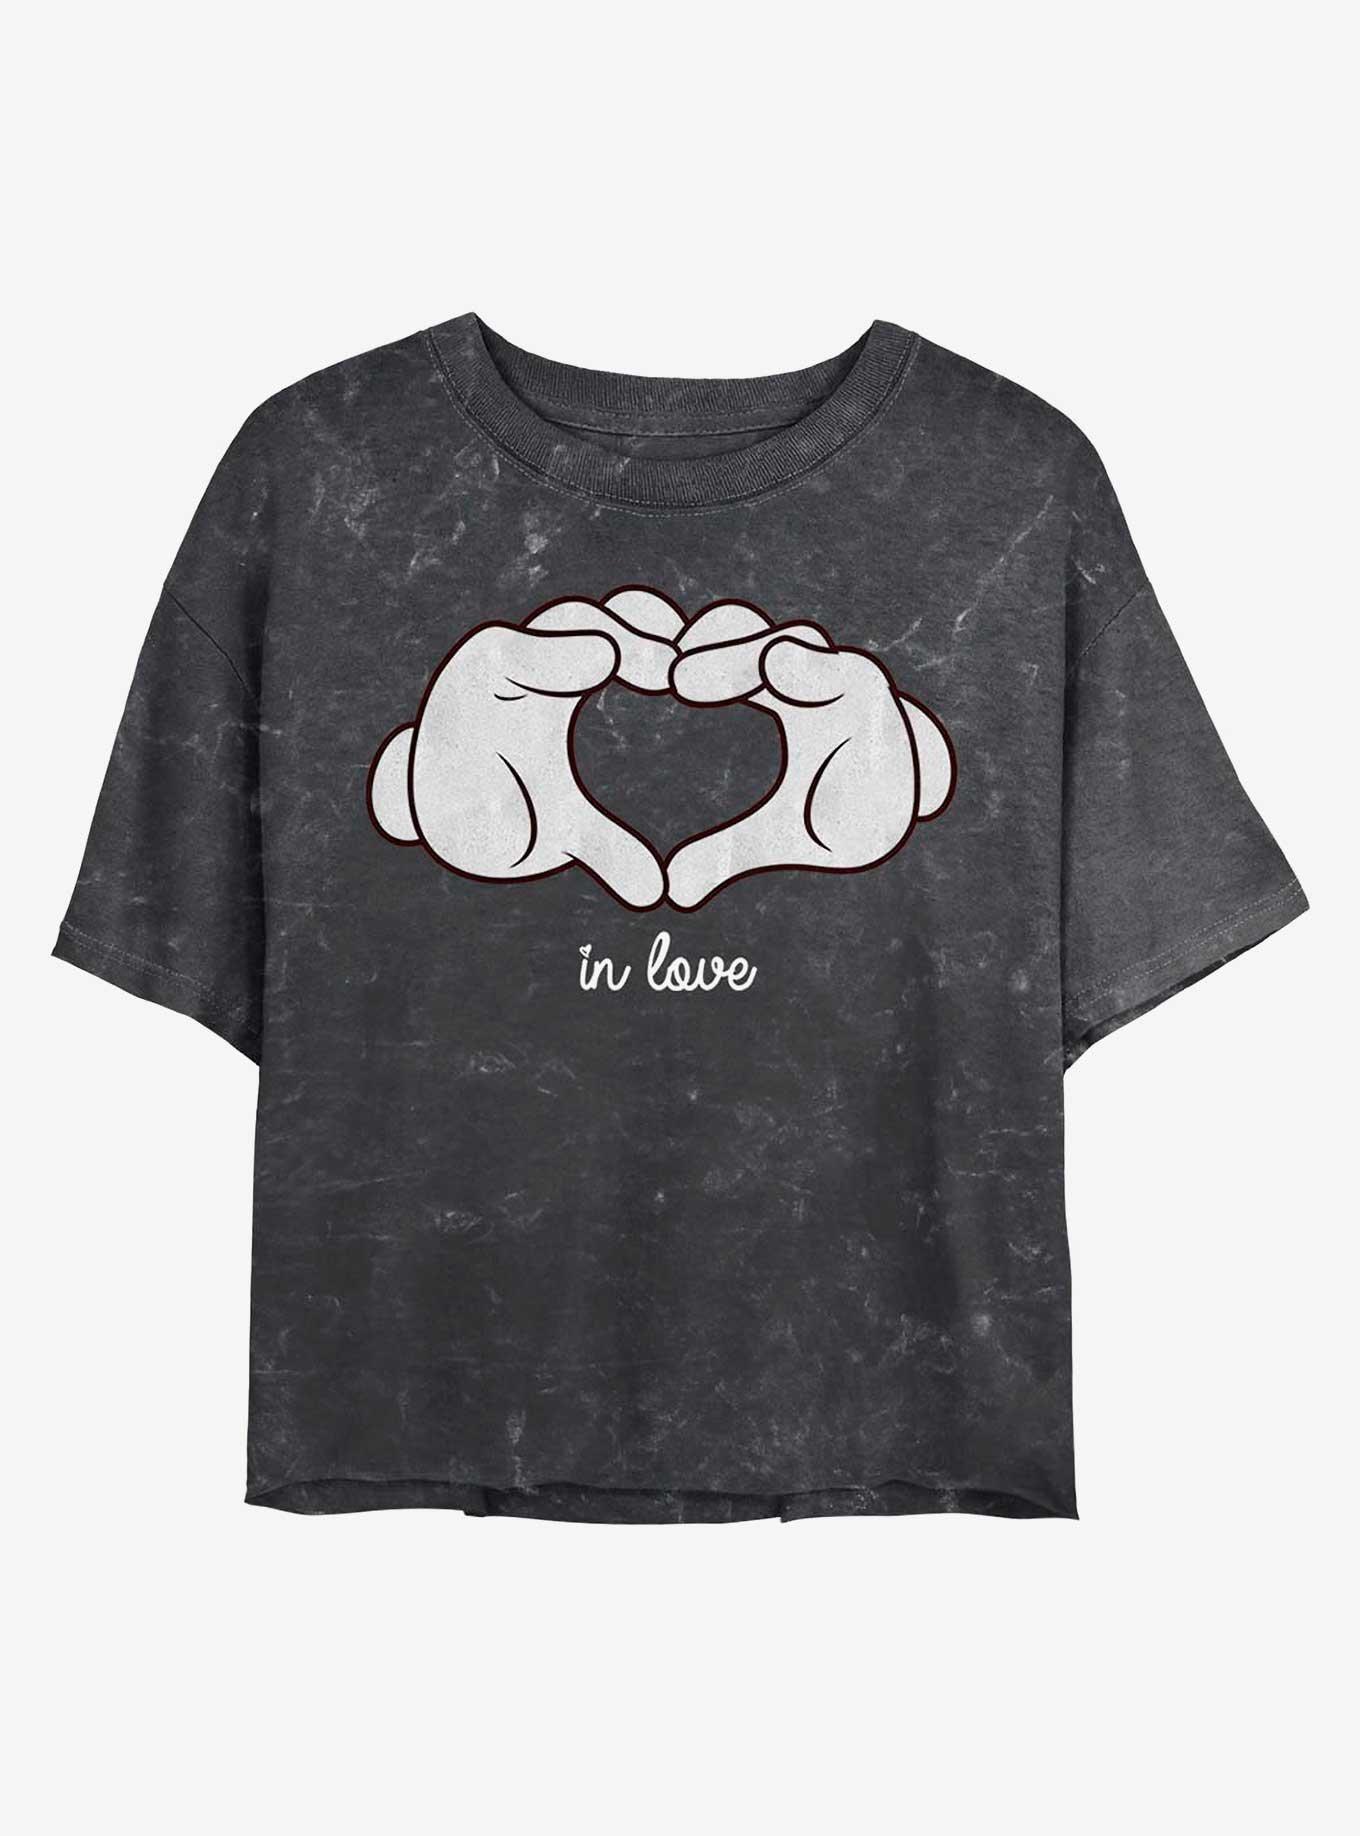 Disney Mickey Mouse Glove Heart Mineral Wash Crop Womens T-Shirt, BLACK, hi-res